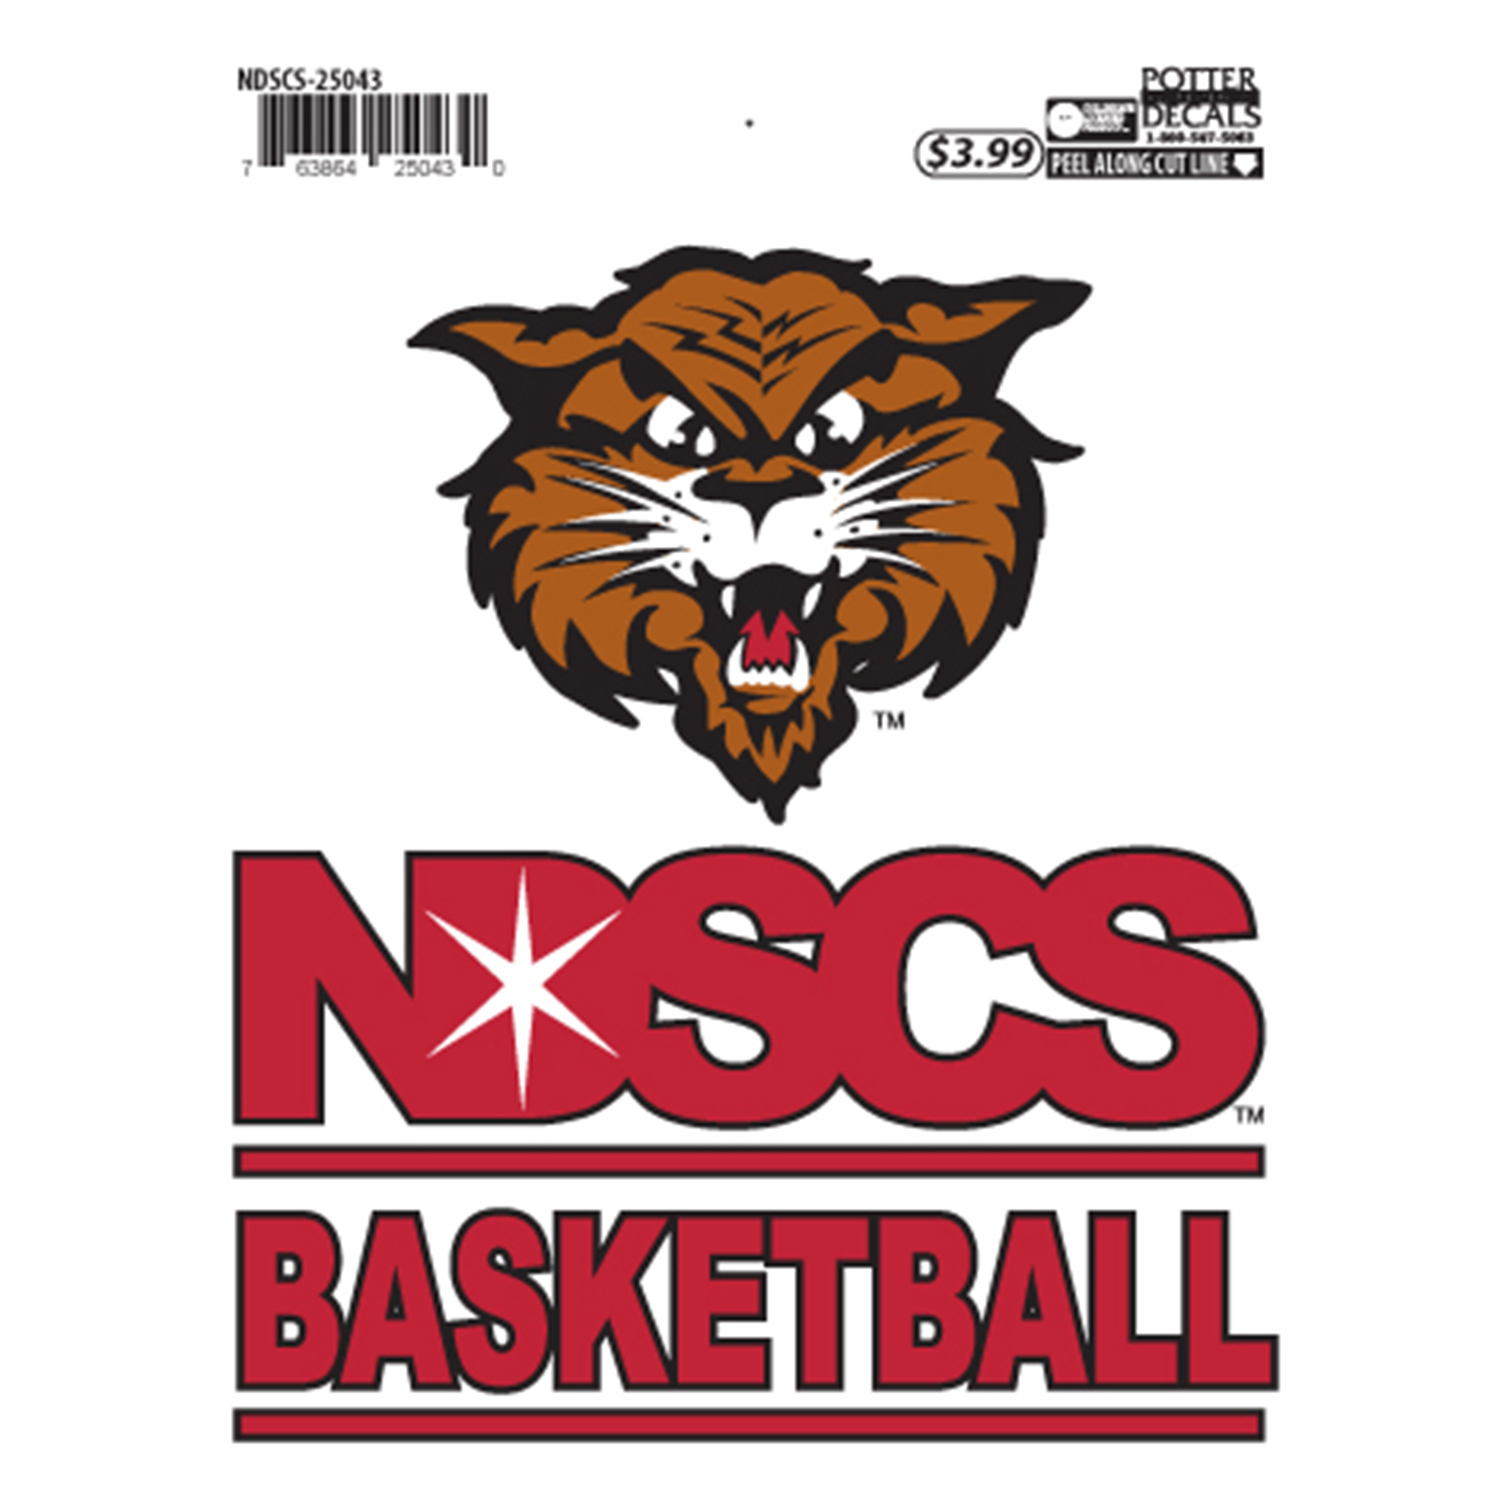 Basketball Decal - by Potter